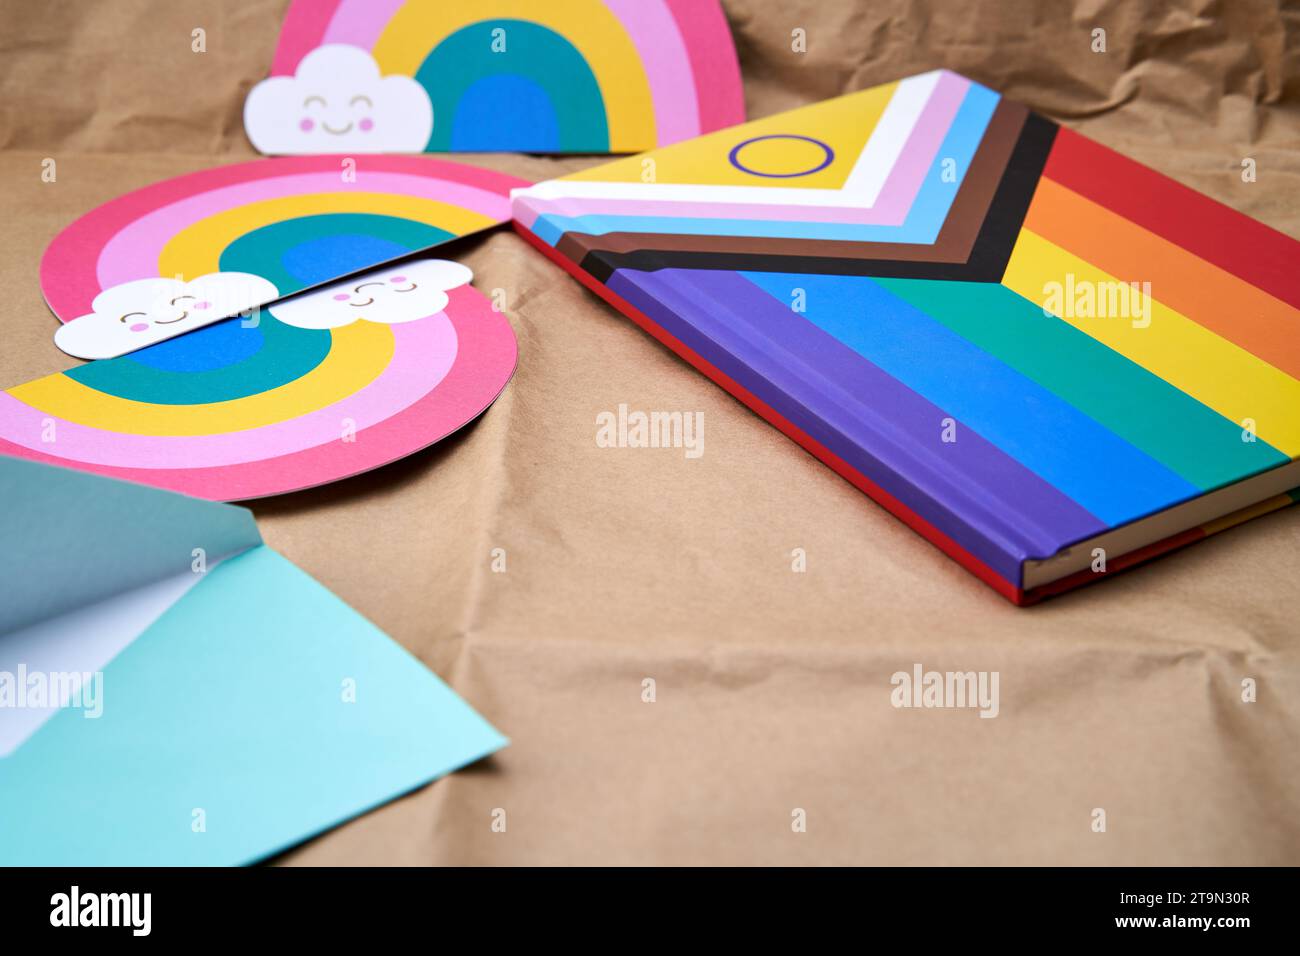 Close-up of a blue envelope on a cardboard surface and in the background a notebook with the lgbtiq+ flag and several rainbows. Stock Photo